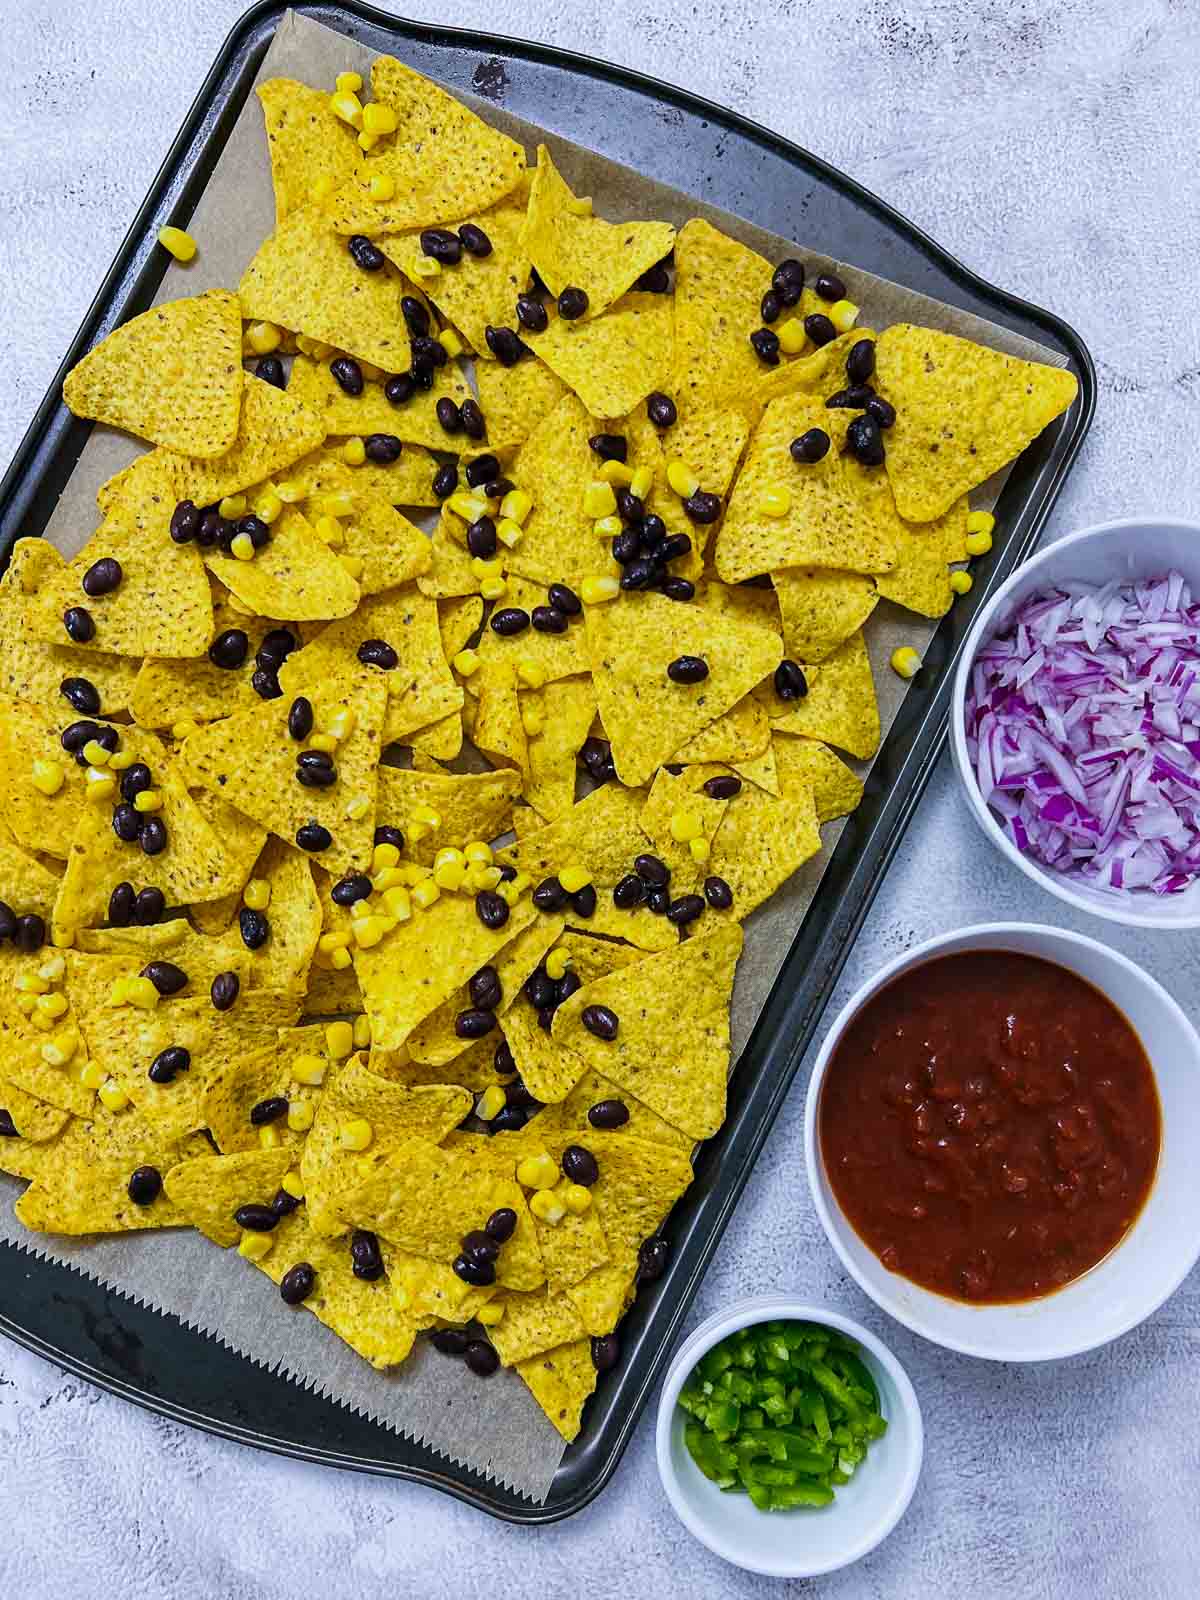 Nachos spread on baking sheet and topped with black beans and corn.